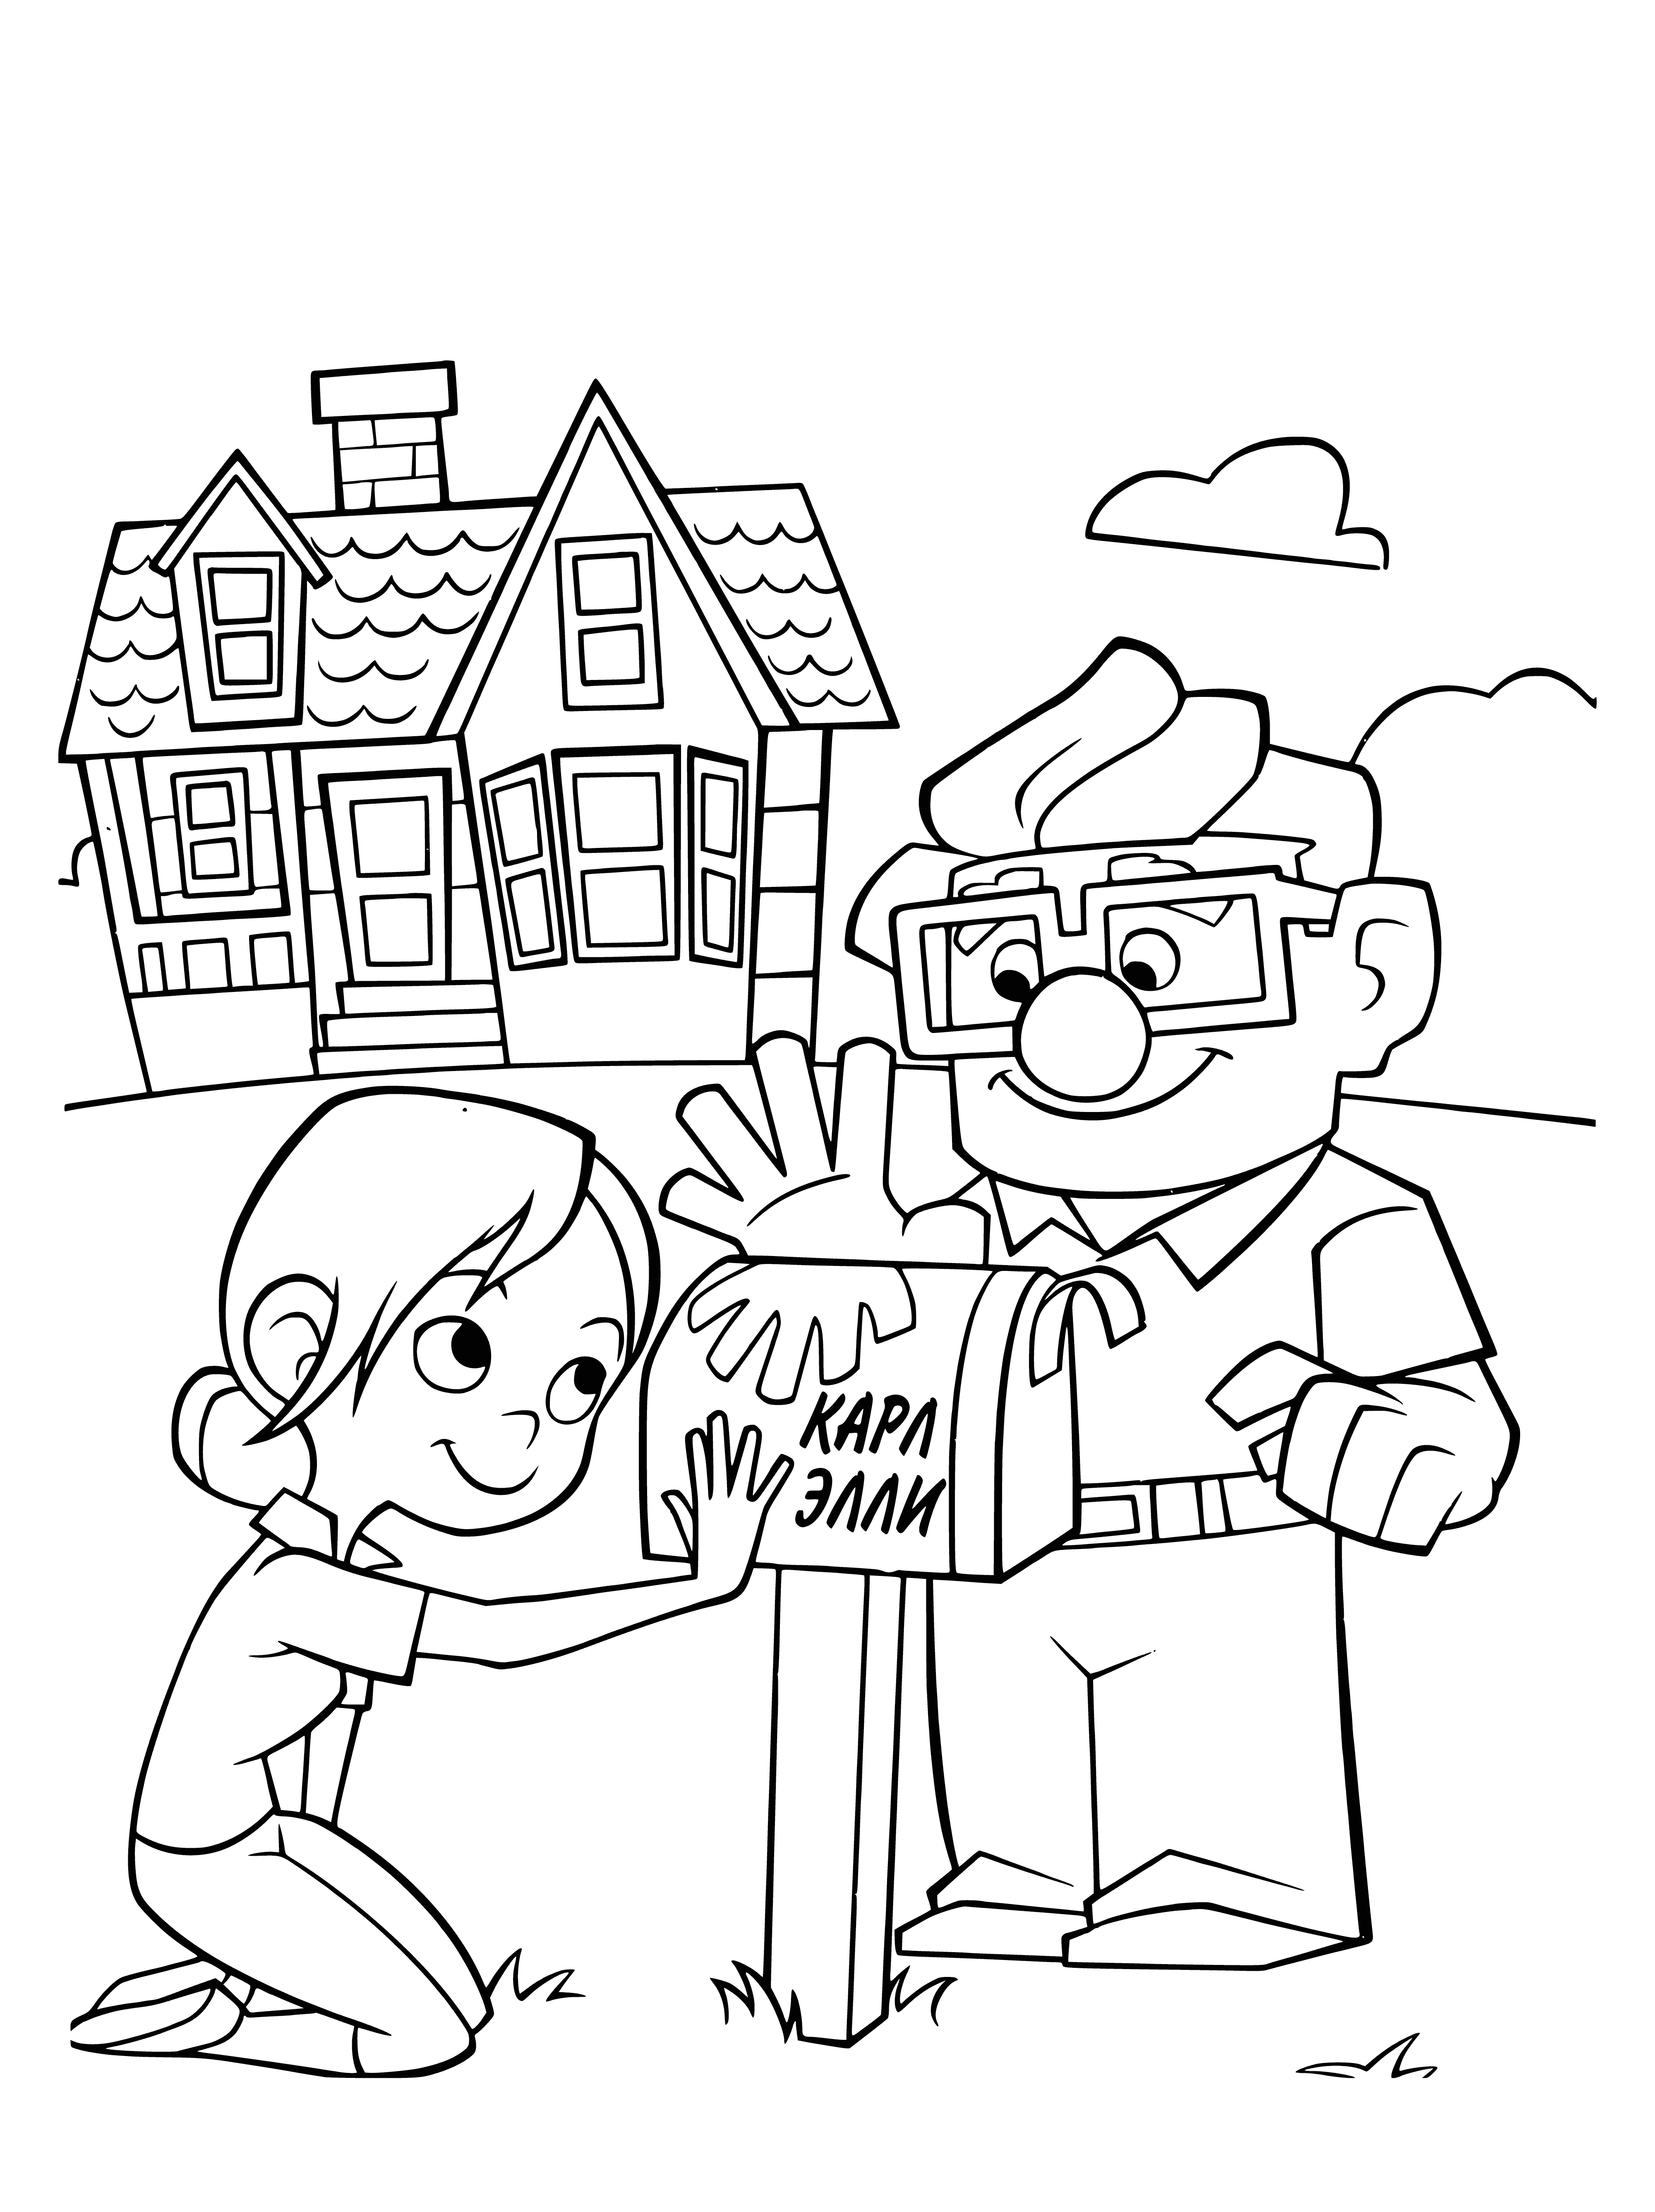 coloring page: Mailbox with American flag, says "Up!" & red house in background.